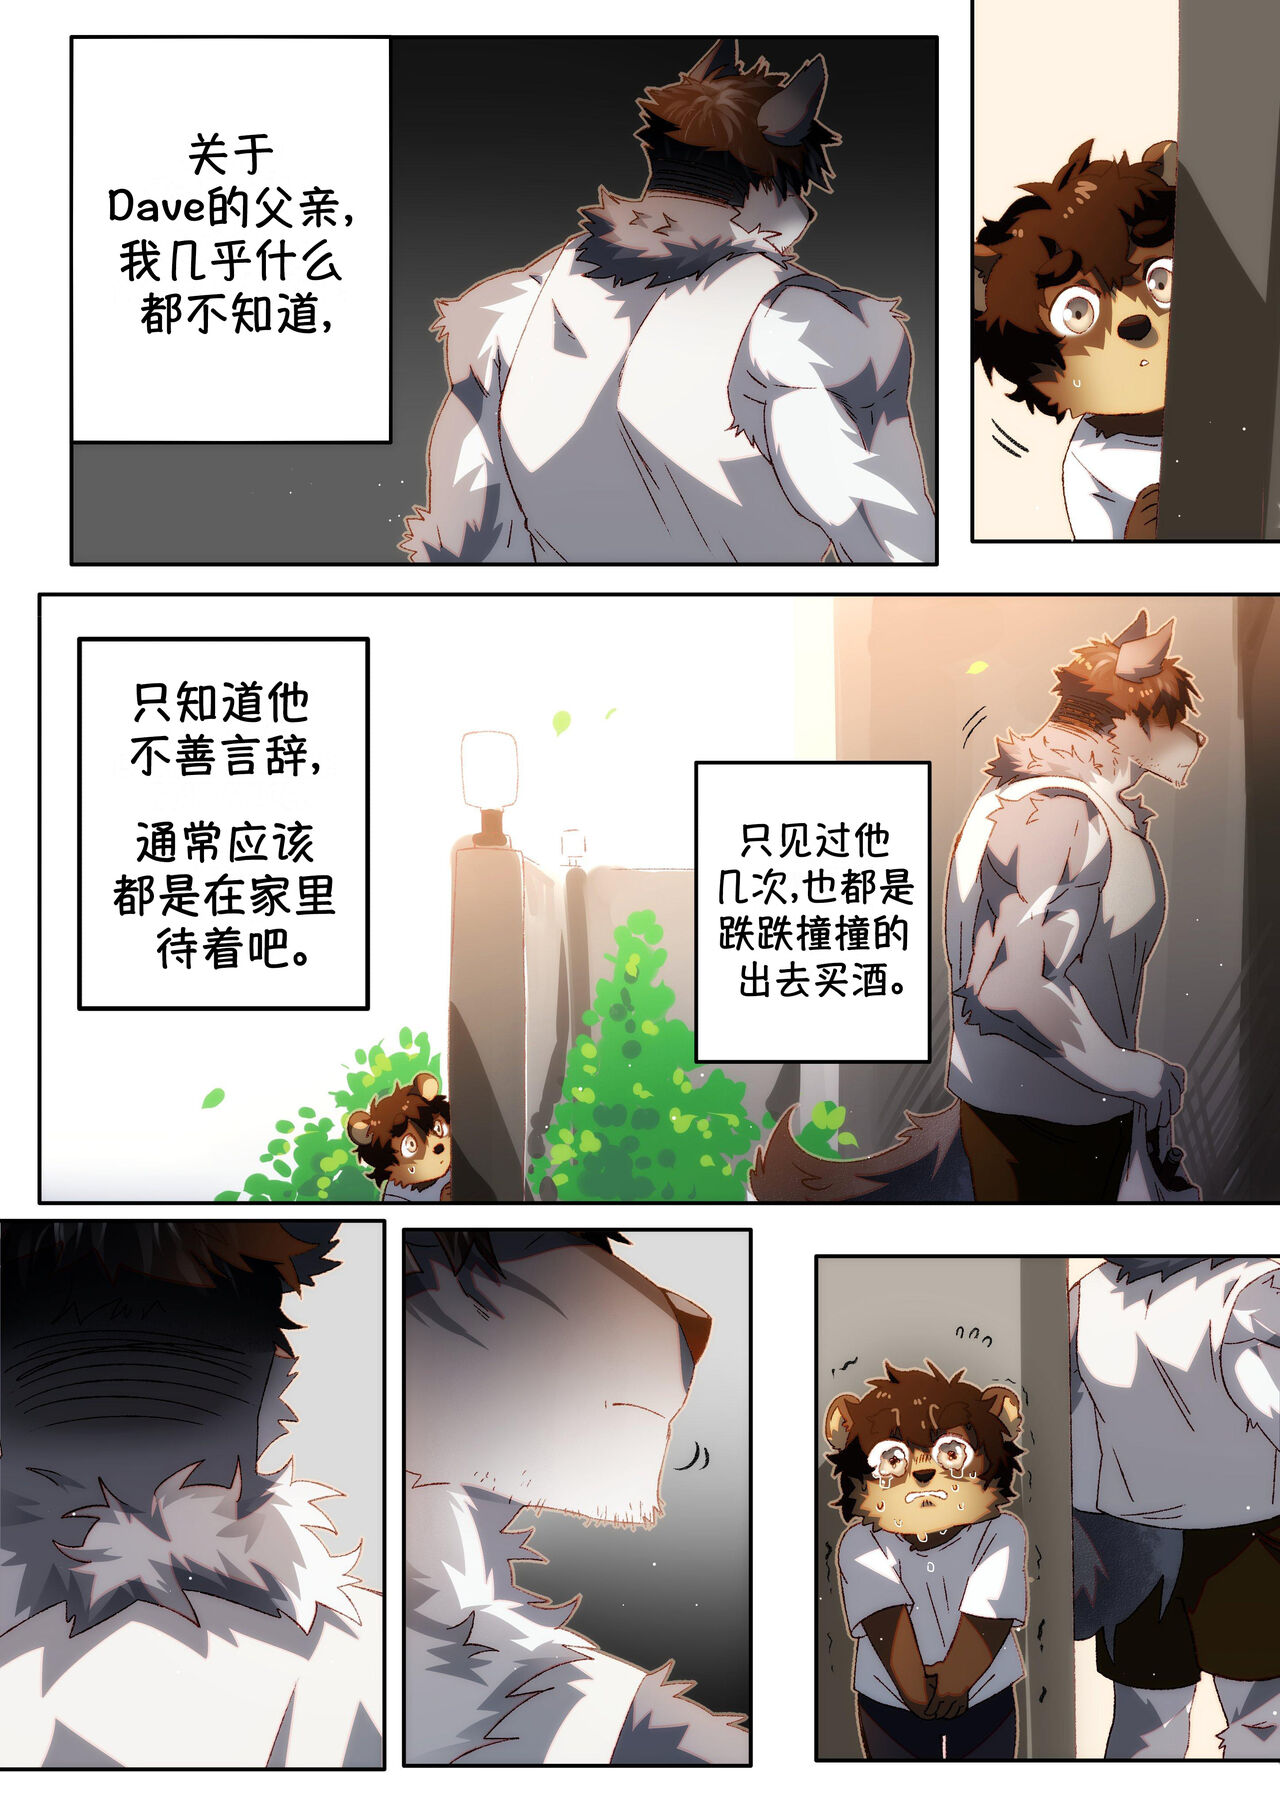 [BooBoo] Passionate Affection 深挚 [Chinese Ver.]  (On Going) 